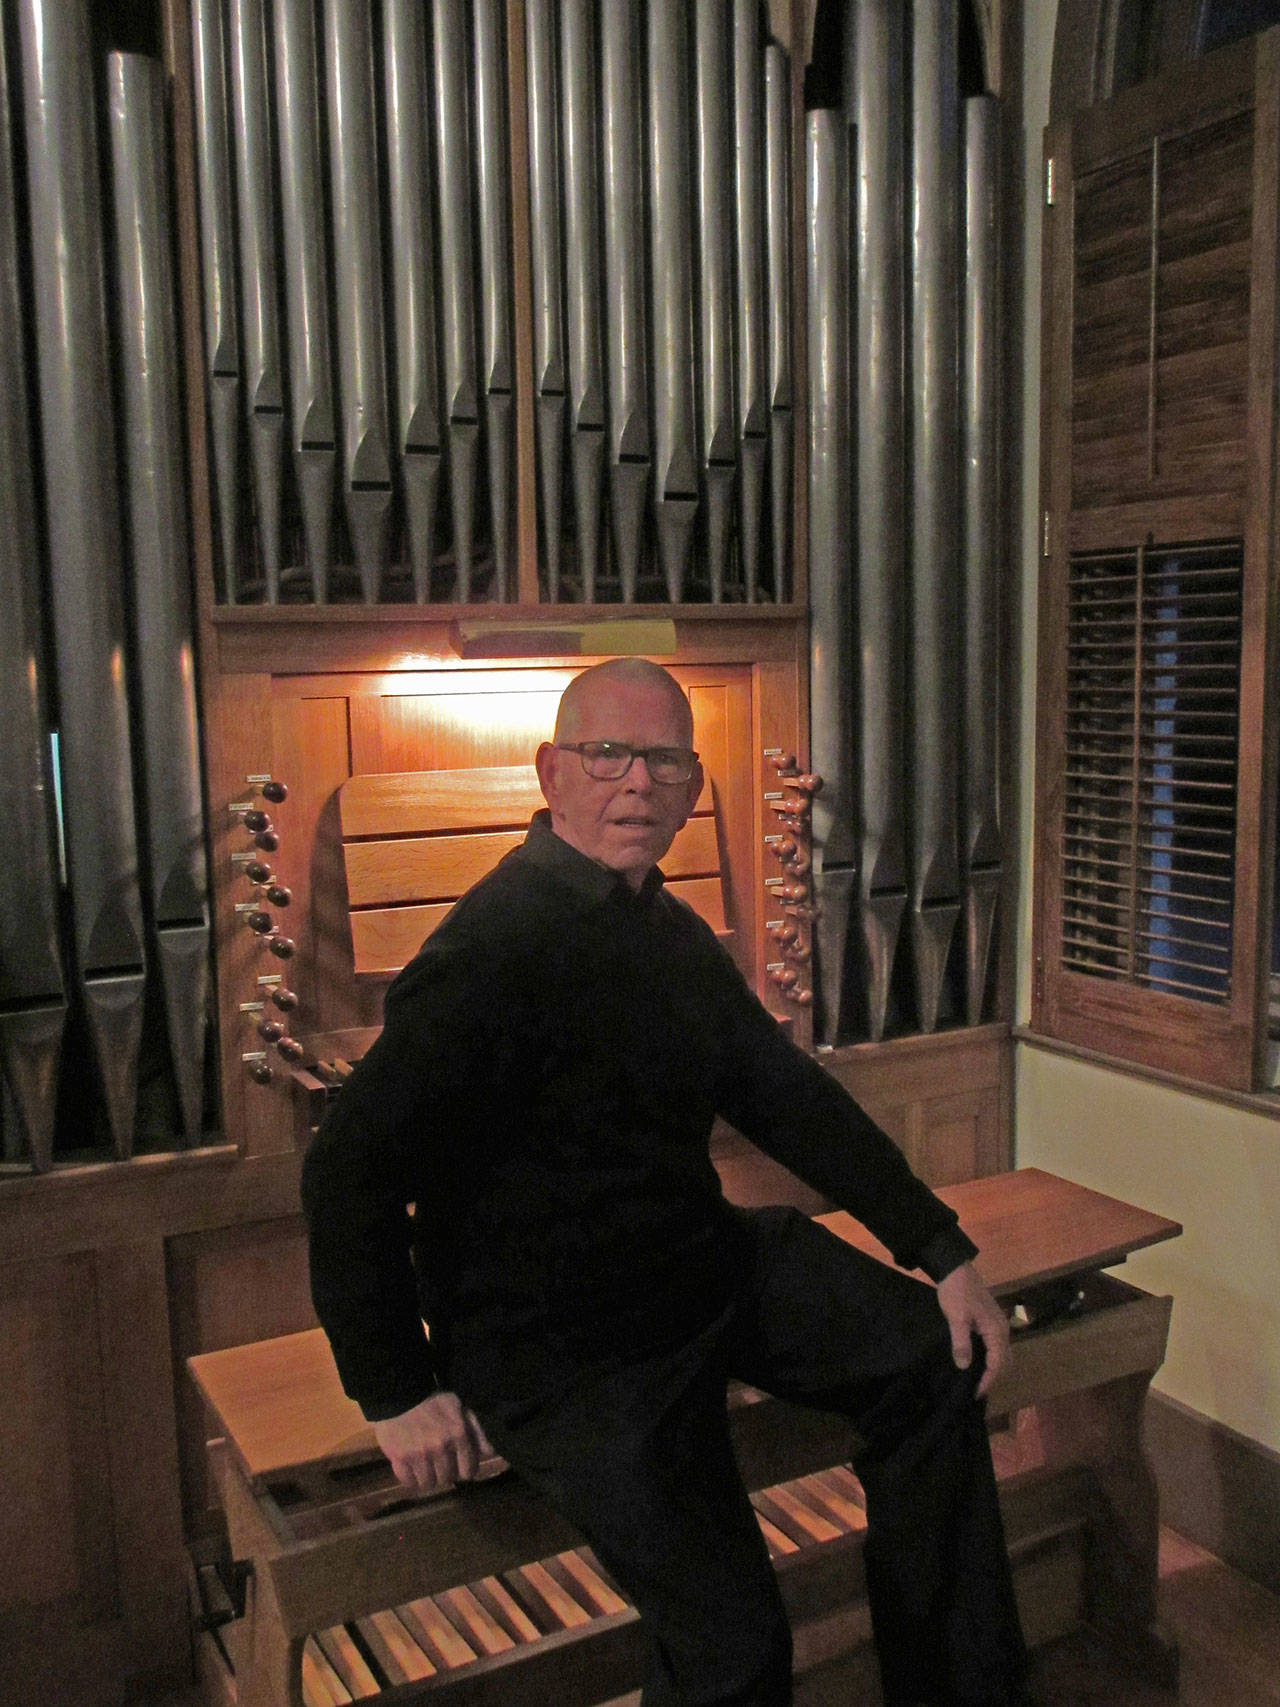 Photo courtesy of Karen Lindsey | Philip Manwell will perform a free organ concert at Port Madison Lutheran Church at 2:30 p.m. Sunday, Sept. 16.